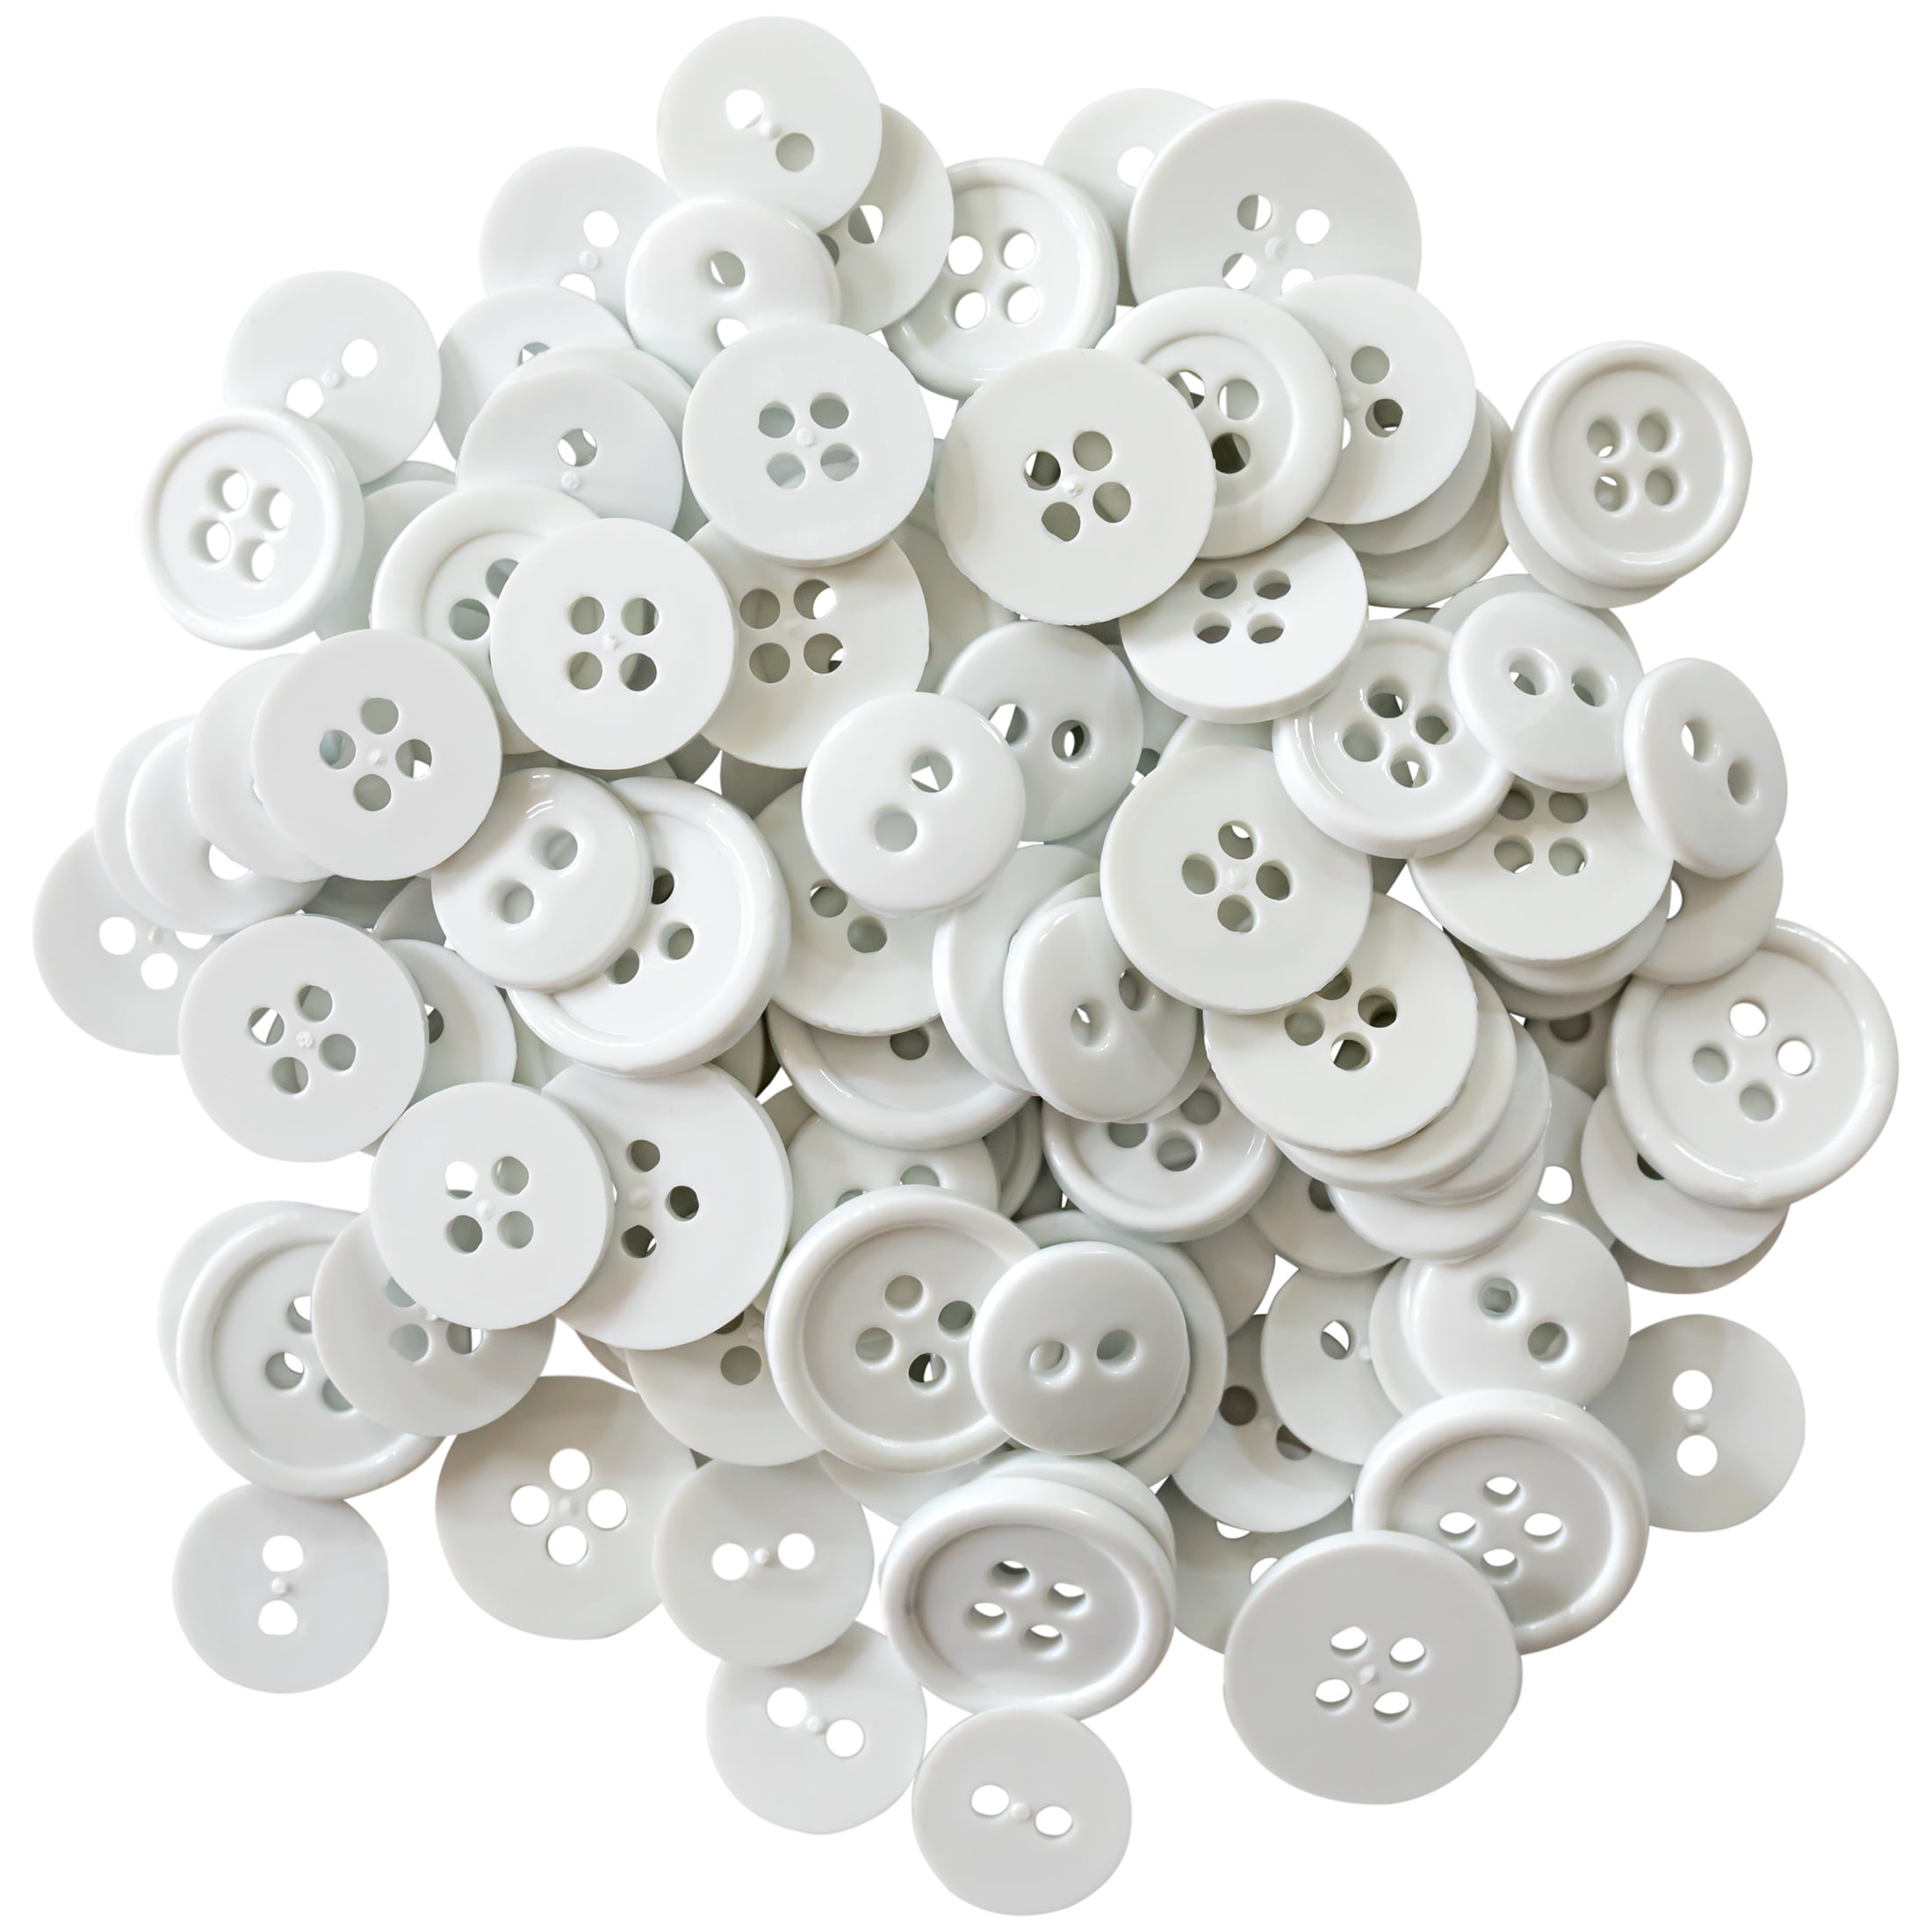 Favorite Findings White Assorted Sew Thru Buttons, 130 Pieces